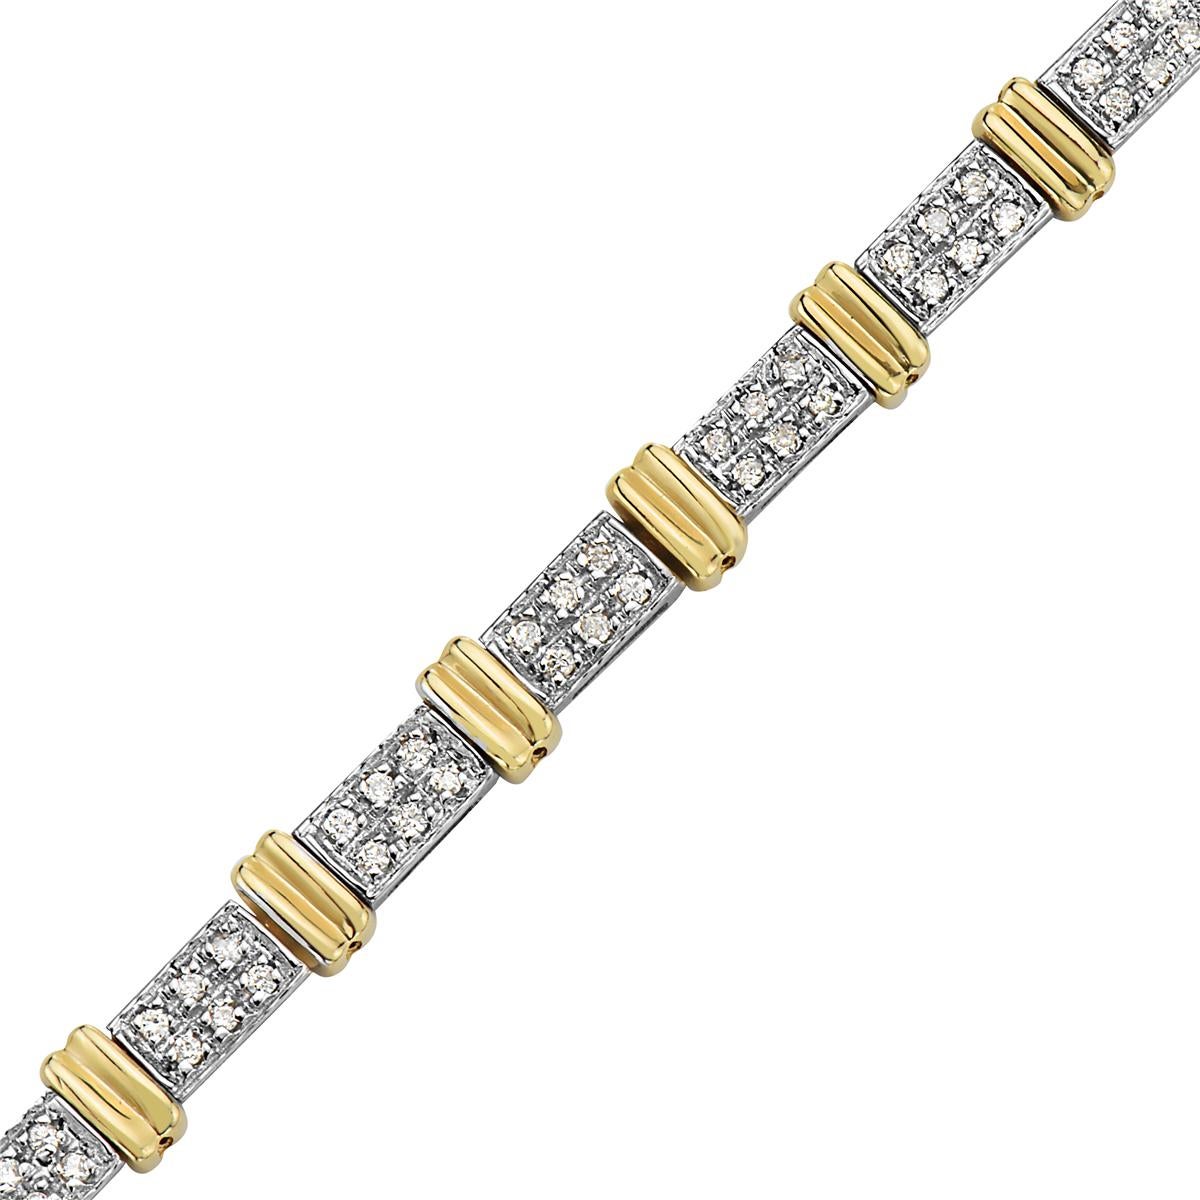 This bracelet features one carat of diamonds set in 14K yellow gold. 7.5 inch length. 17 grams total weight. 


Viewings available in our NYC showroom by appointment.